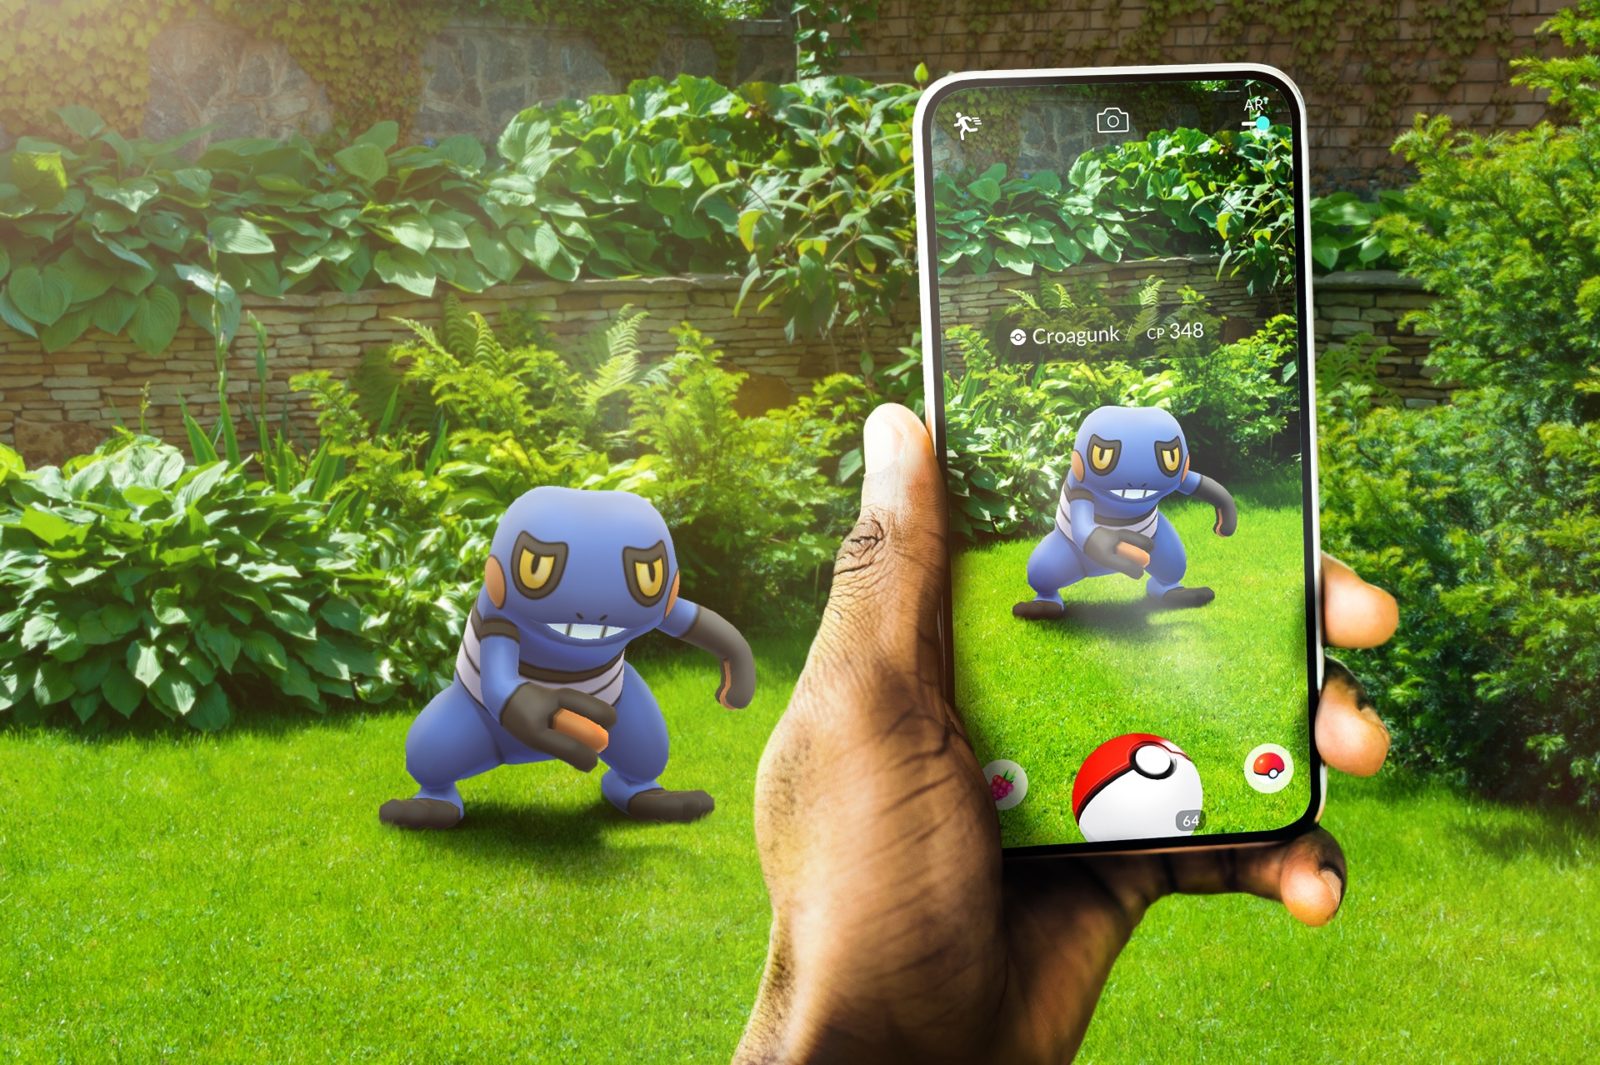 A hand holds out a smart phone with an image of a pokemon on it. The same pokemon is in the background on the grass.